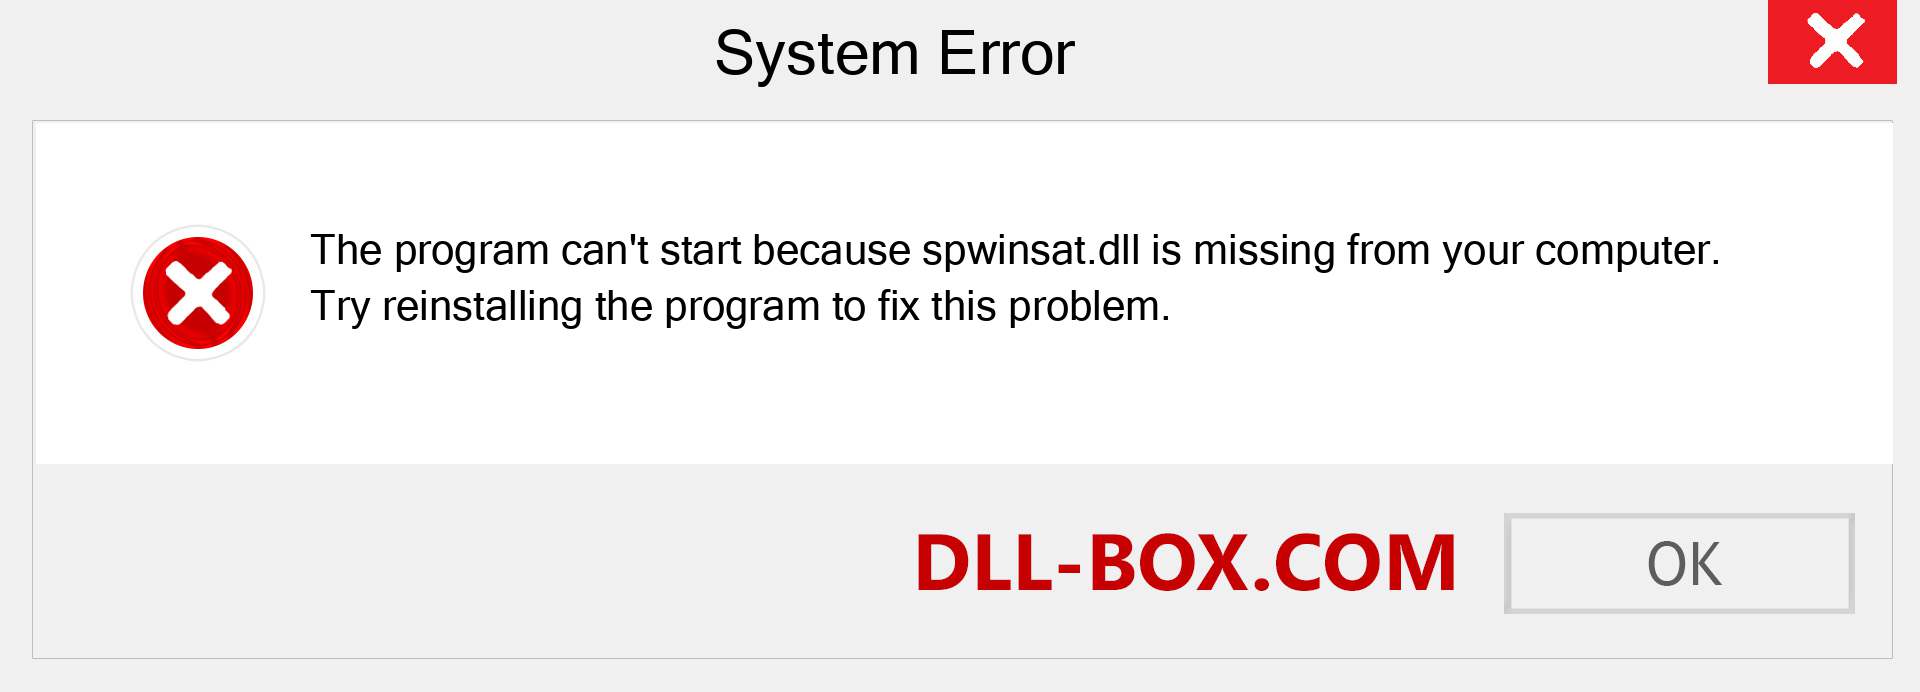  spwinsat.dll file is missing?. Download for Windows 7, 8, 10 - Fix  spwinsat dll Missing Error on Windows, photos, images